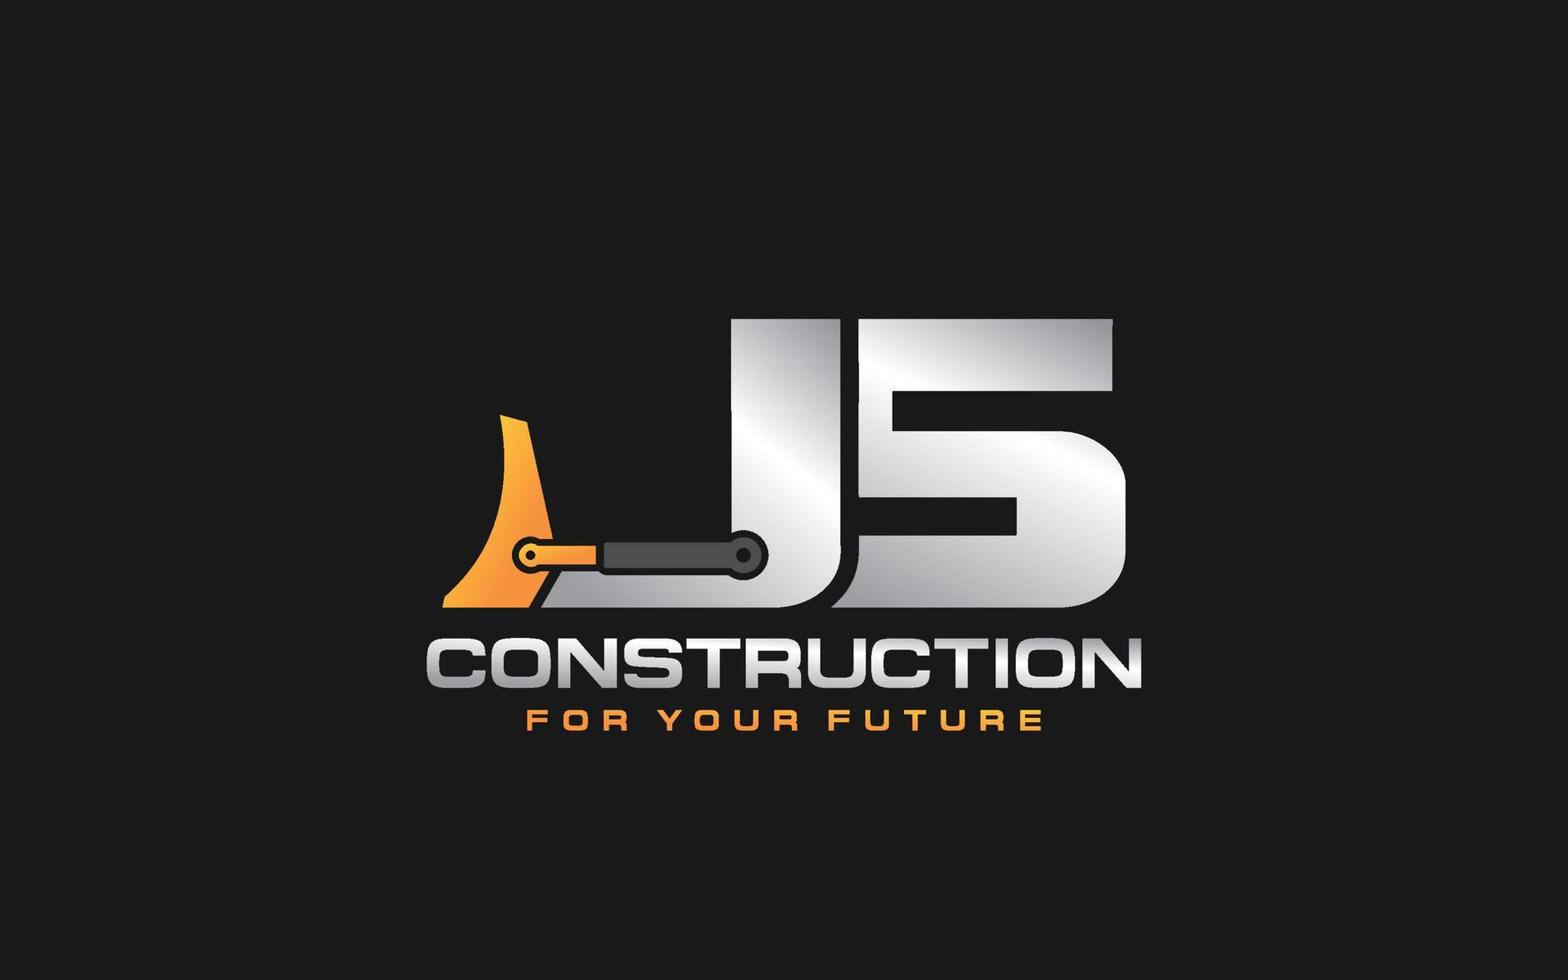 JS logo excavator for construction company. Heavy equipment template vector illustration for your brand.